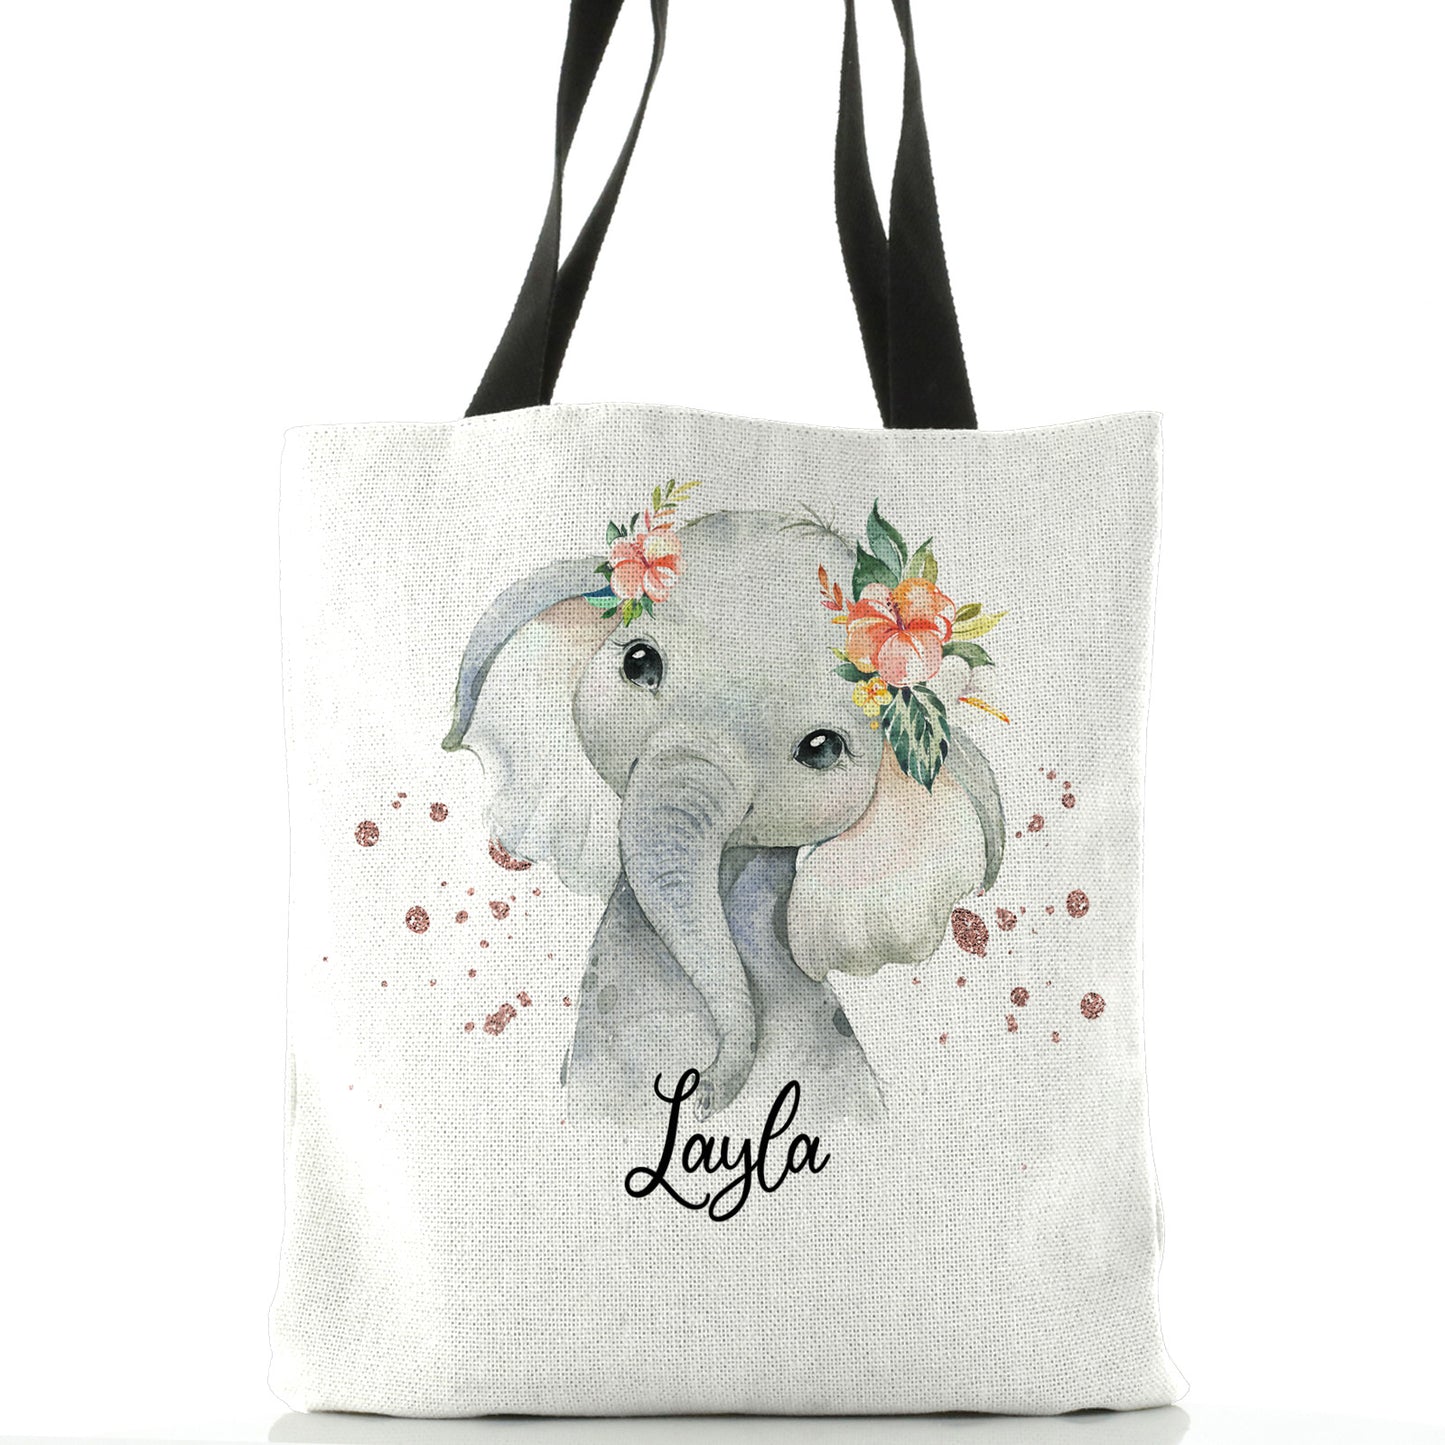 Personalised White Tote Bag with Elephant Rain Drop Glitter Print and Cute Text